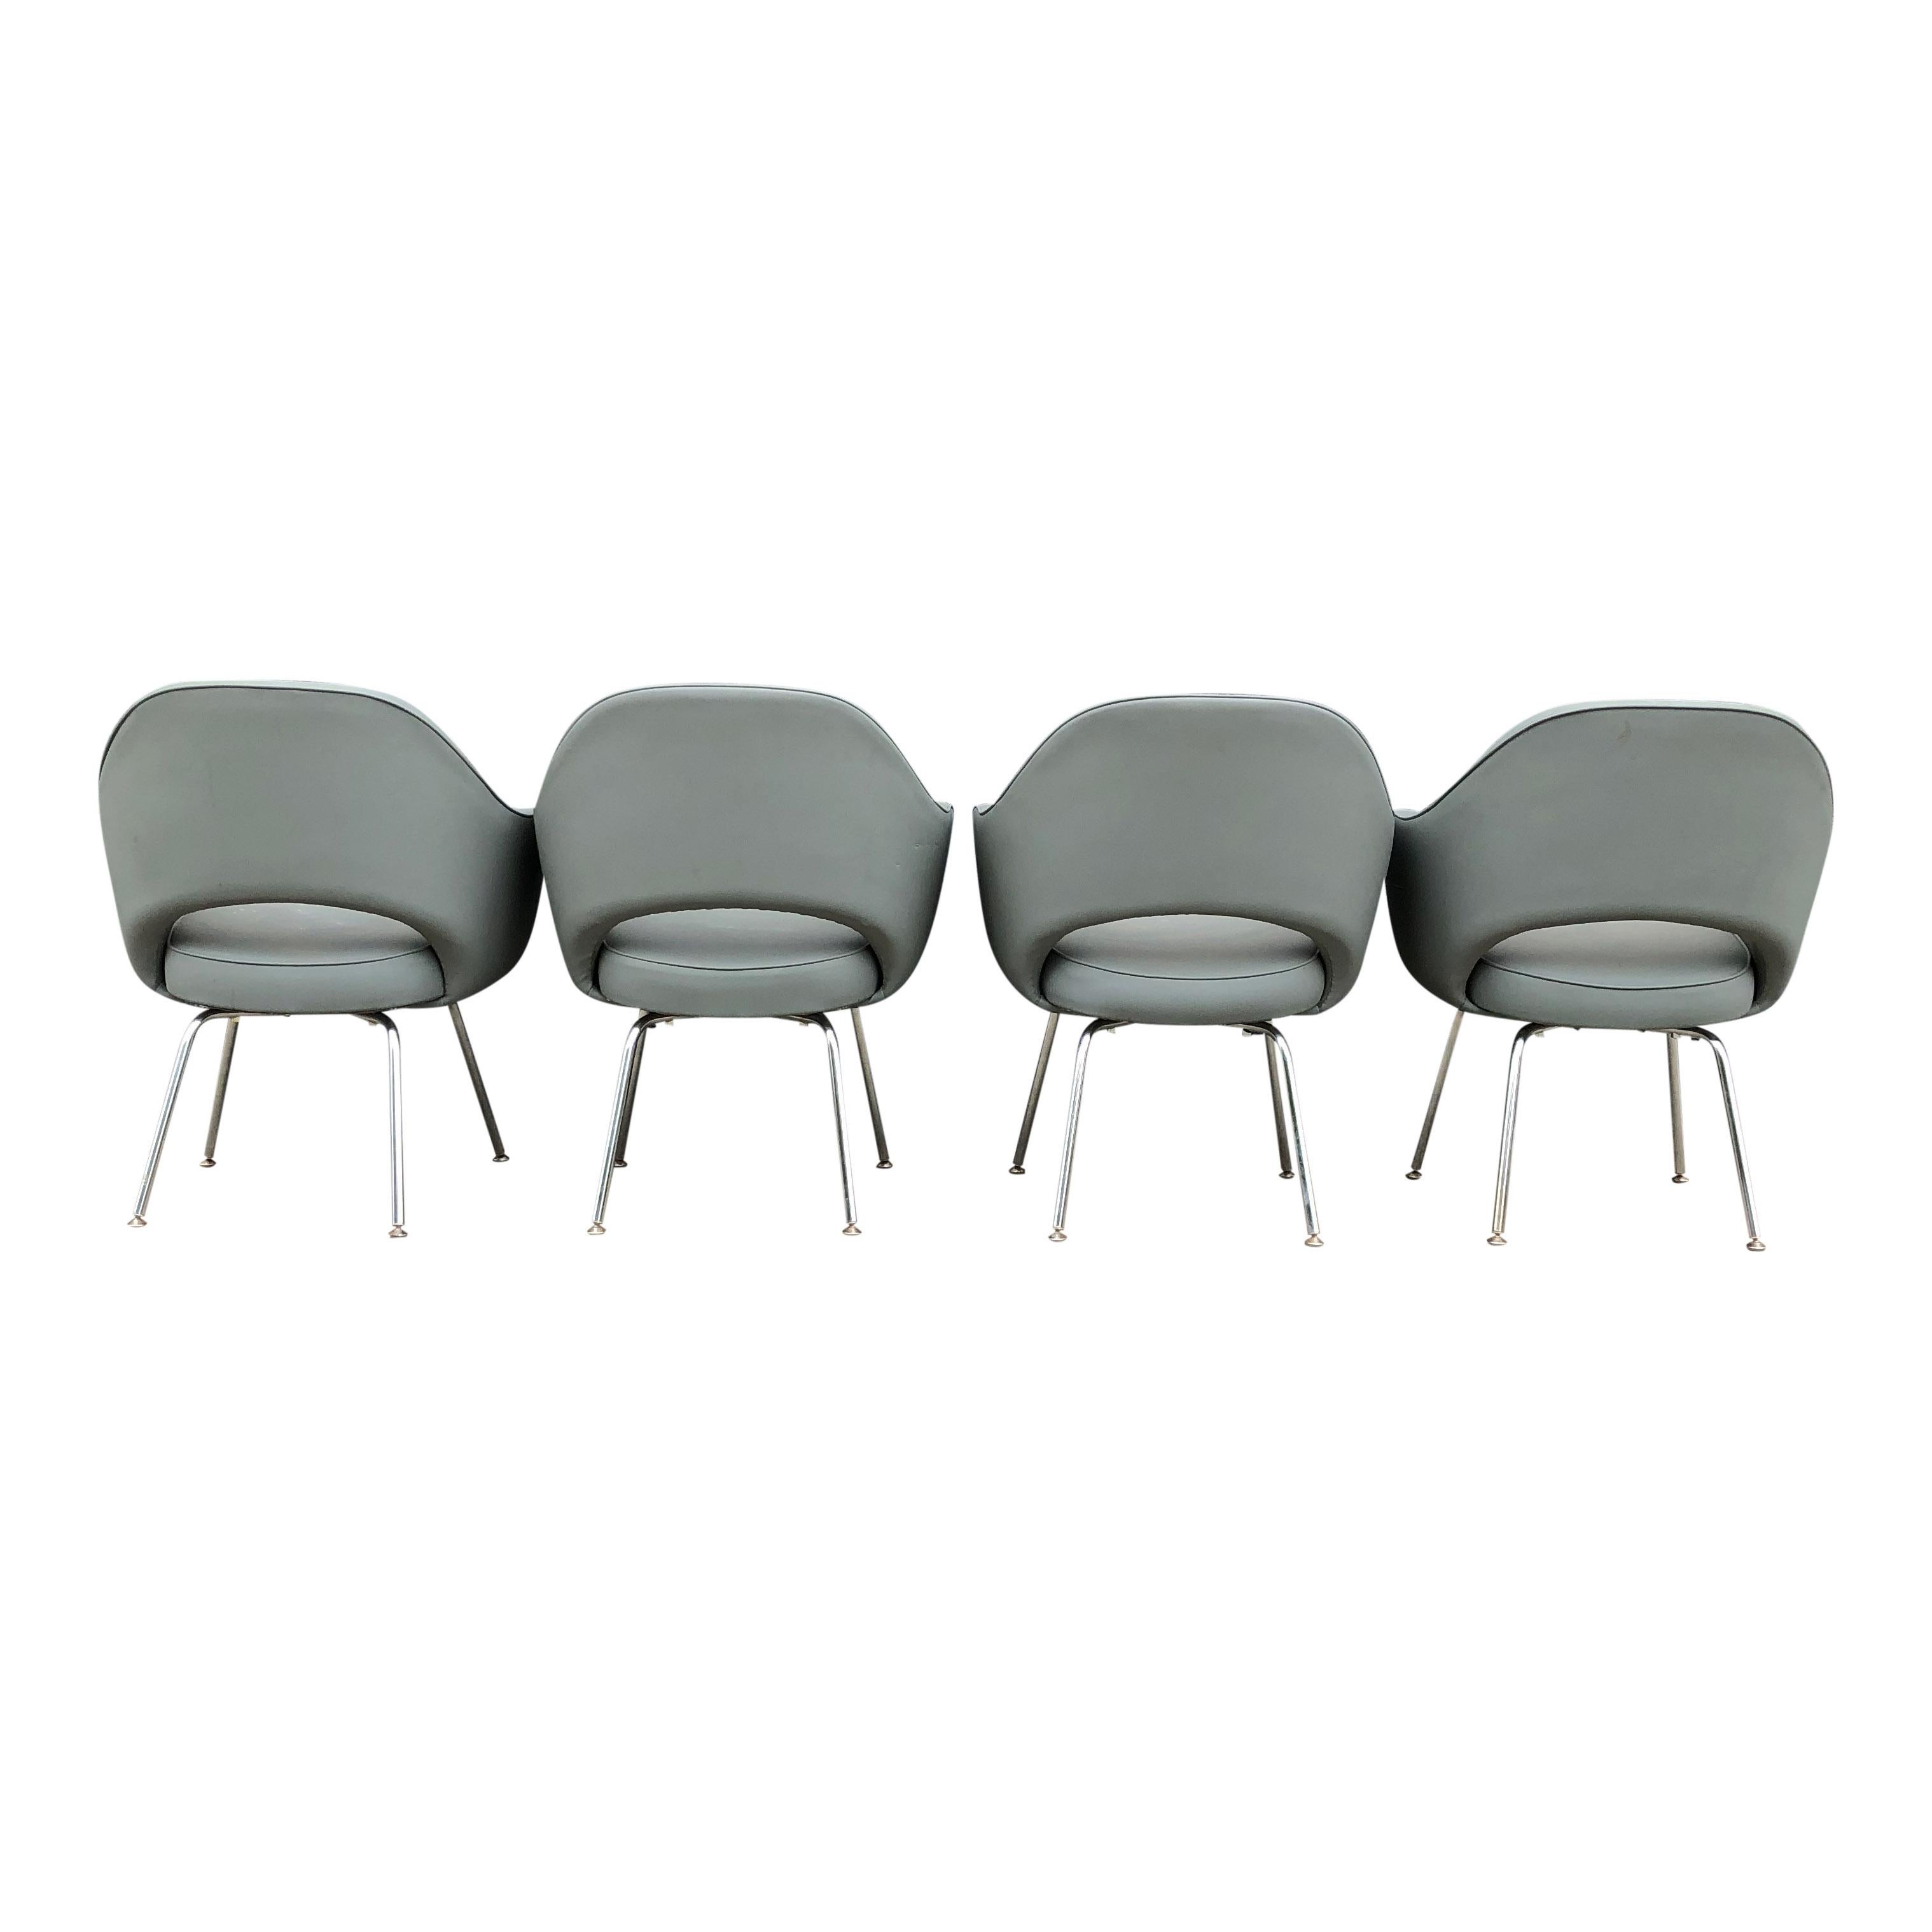 American Eero Saarinen for Knoll Executive Chairs for Re-Upholstery